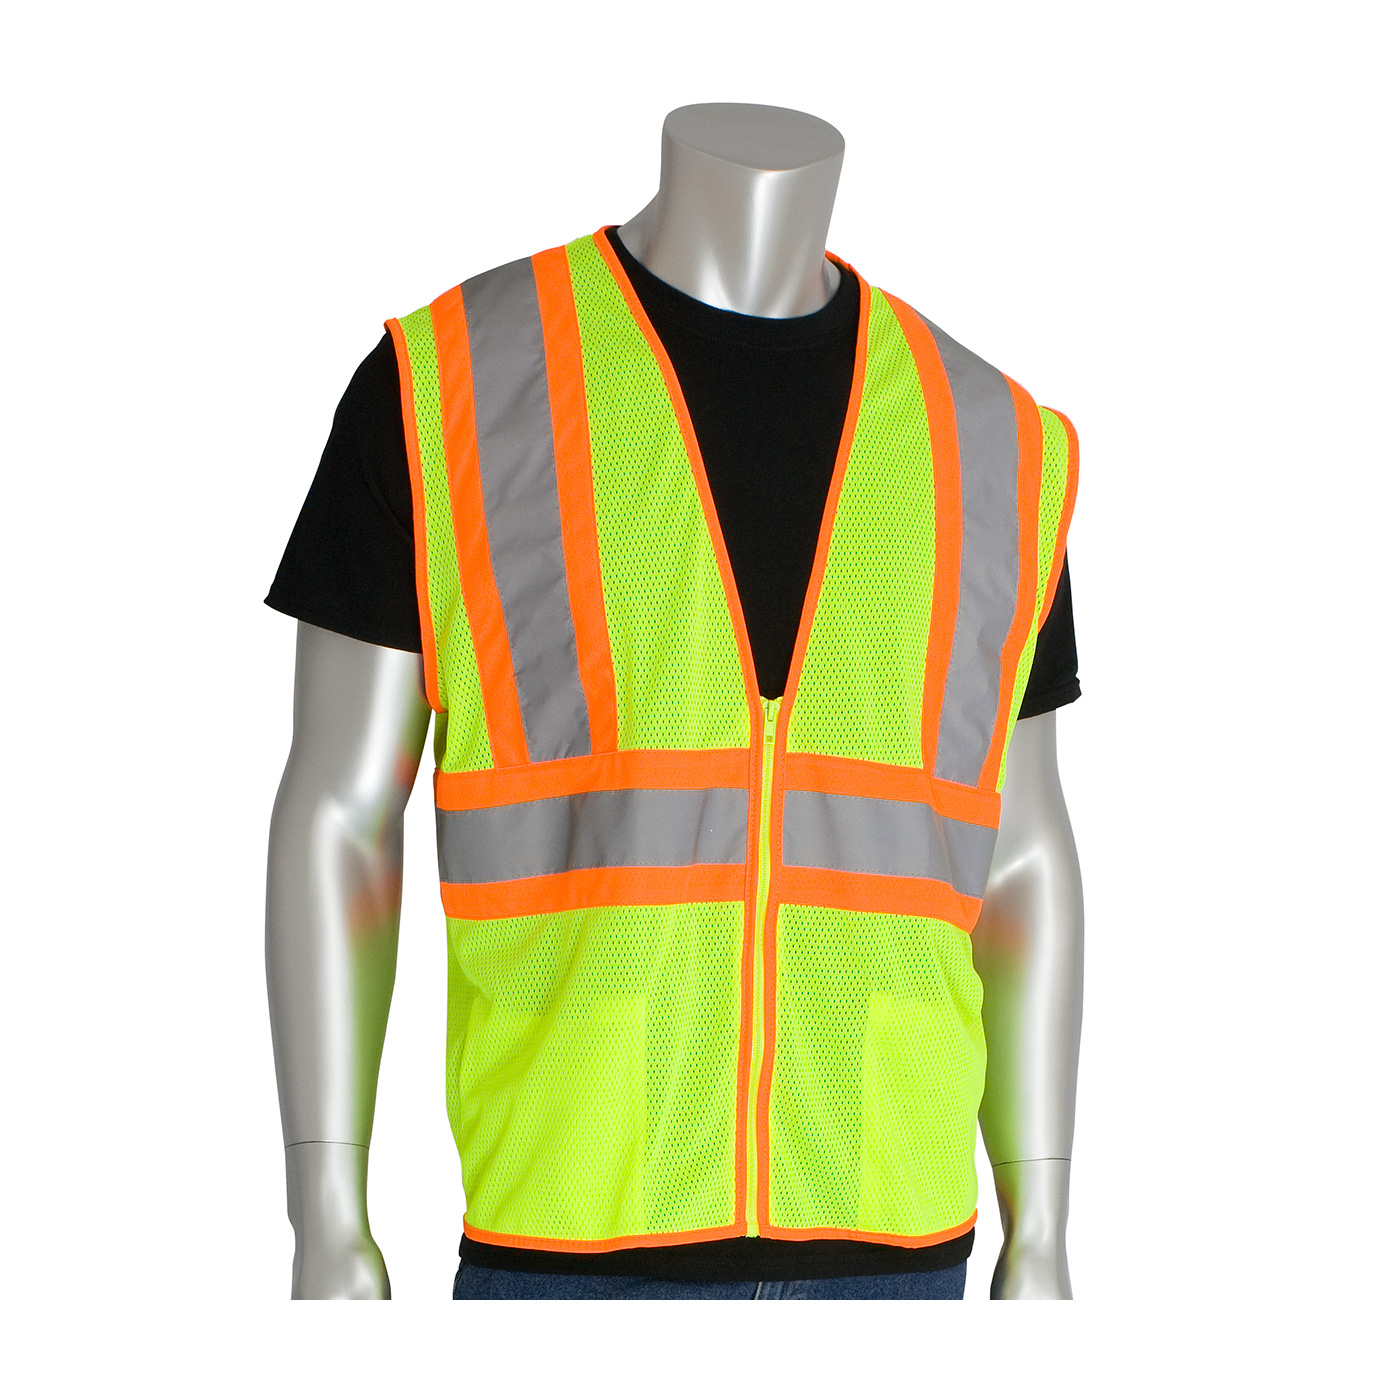 PIP 302-MVLY-2X ANSI Type R Class 2 Yellow Value Two-Tone Mesh Vest - 2X-Large PID-302 MVLY 2X